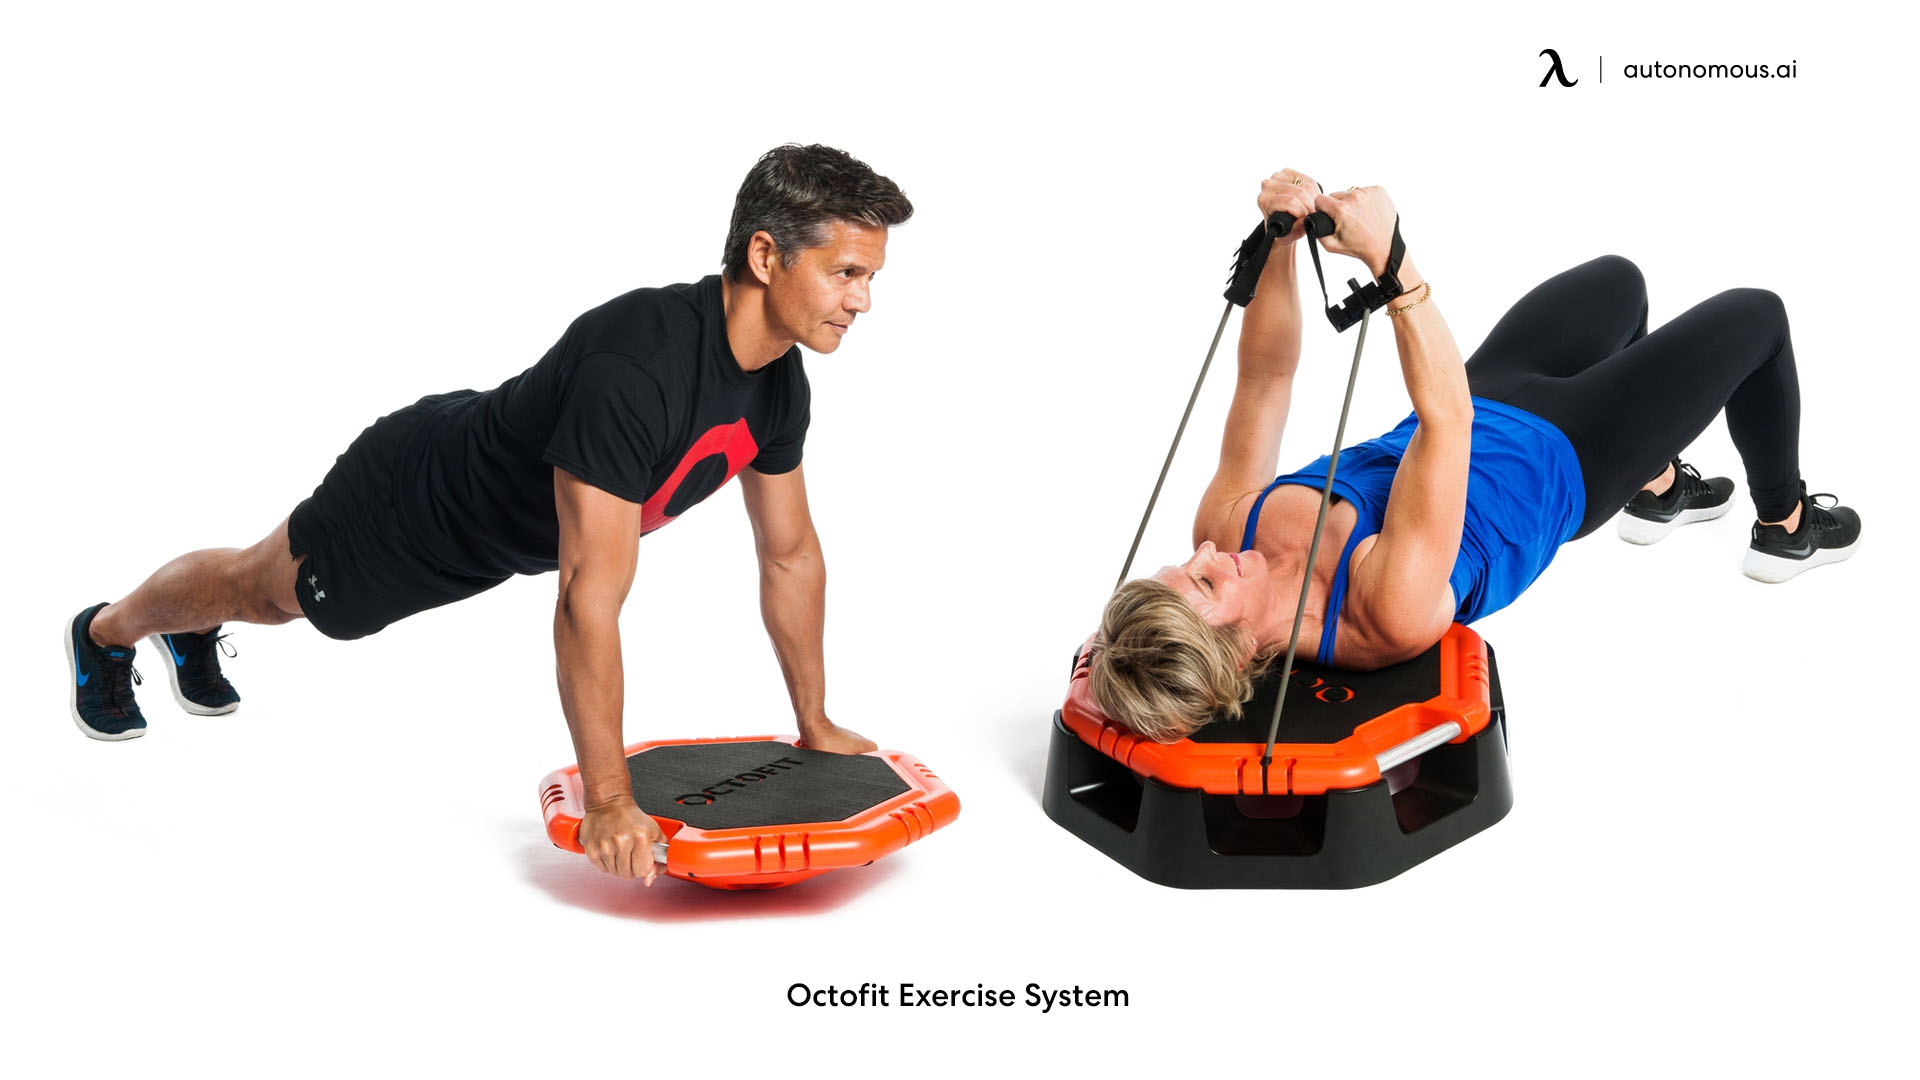 Octofit Exercise System full-body workout equipment at home